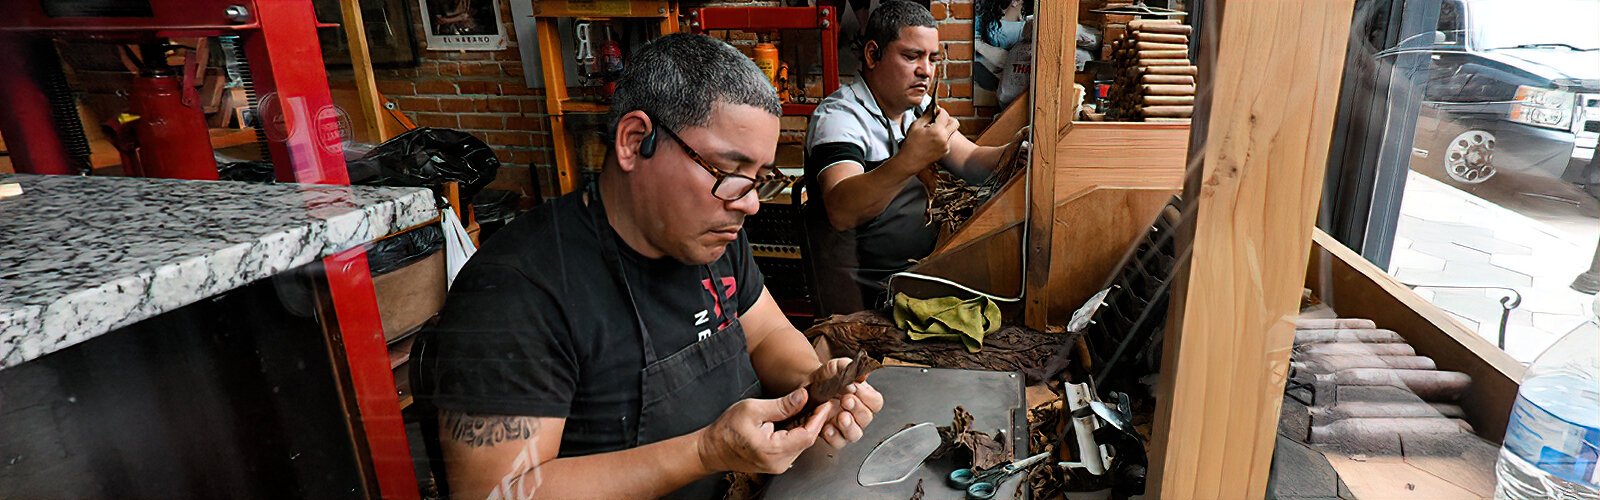 Two cigar workers can be seen through the window, rolling cigars at La Faraona Cigars in Ybor City. At the end of the 19th century, some 500,000 cigars were rolled per month in the first Sanchez y Haya factory.